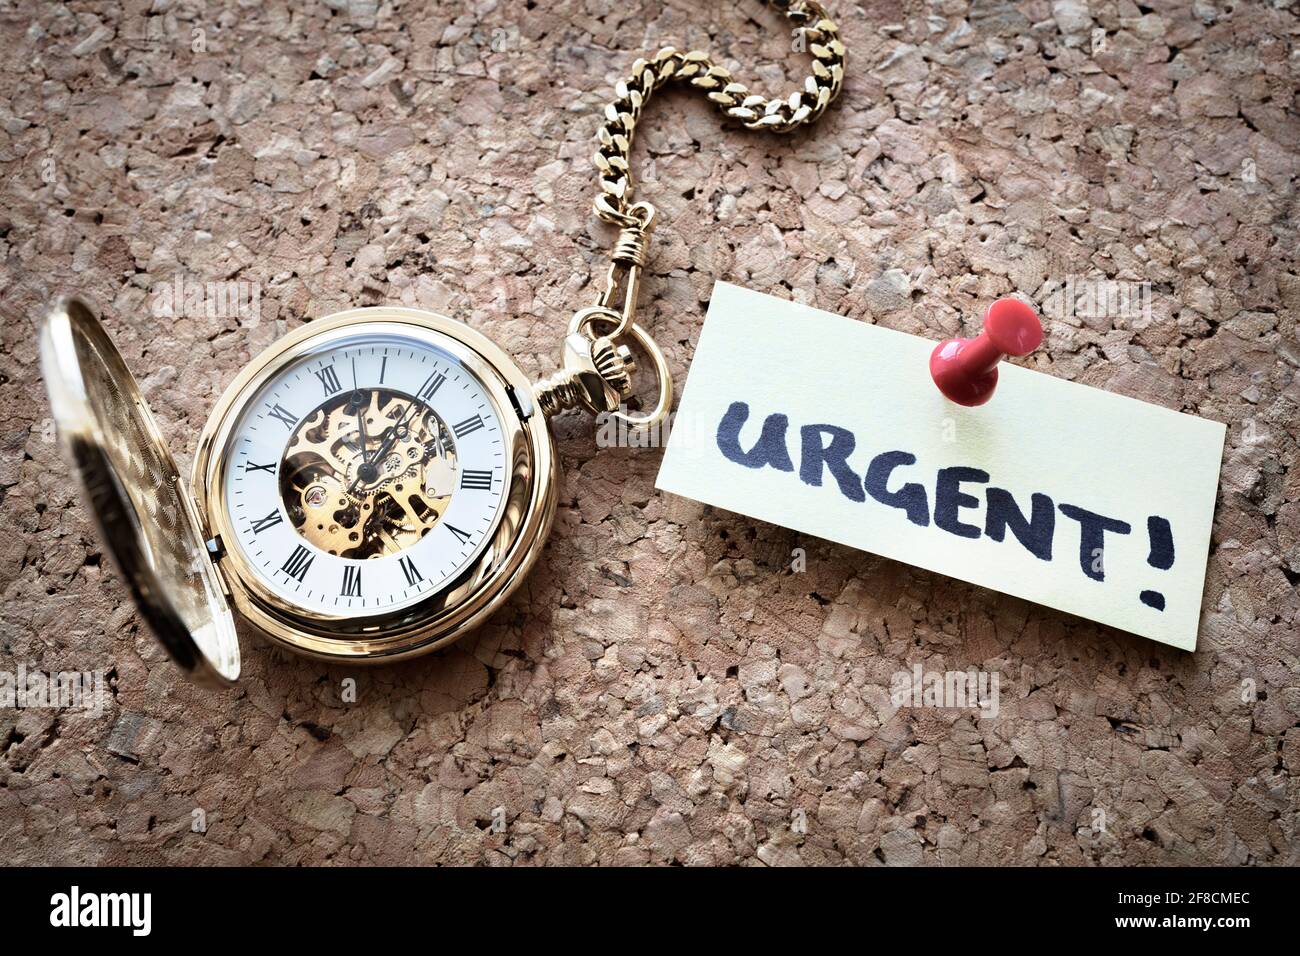 Urgent deadline note and time on pocket watch Stock Photo